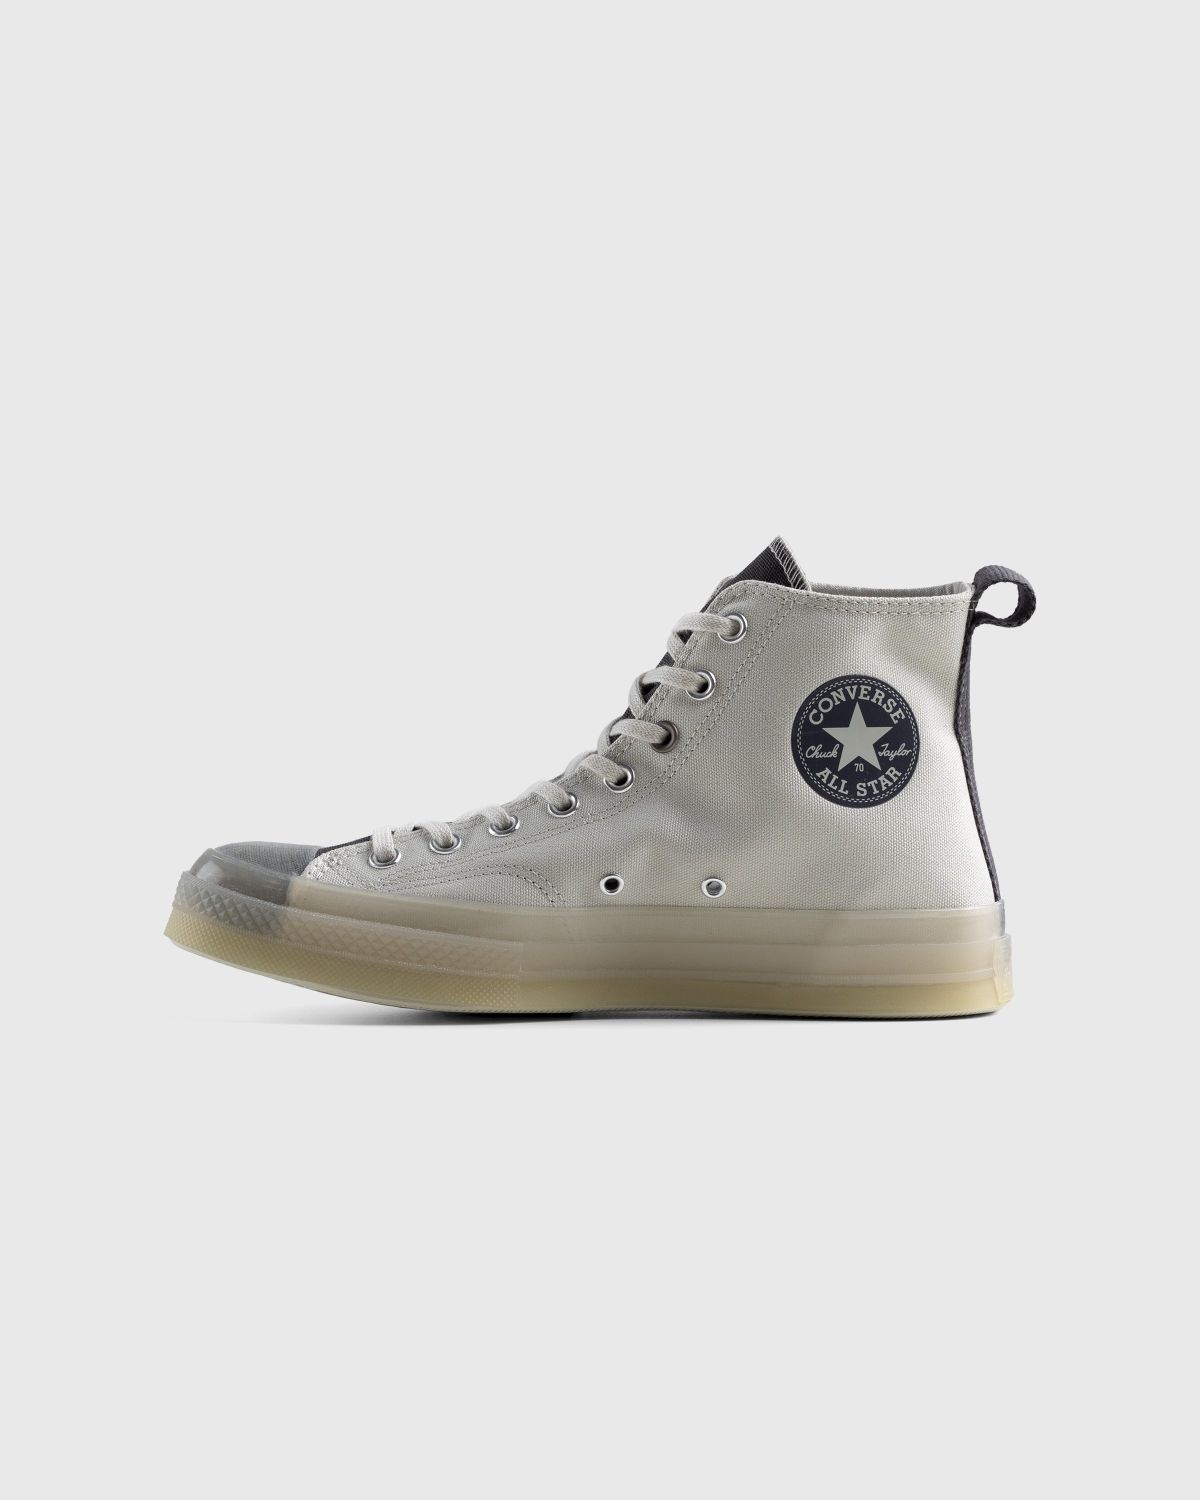 Converse x A-Cold-Wall* – Chuck 70 Hi Silver Birch/Pavement - High Top Sneakers - Grey - Image 2